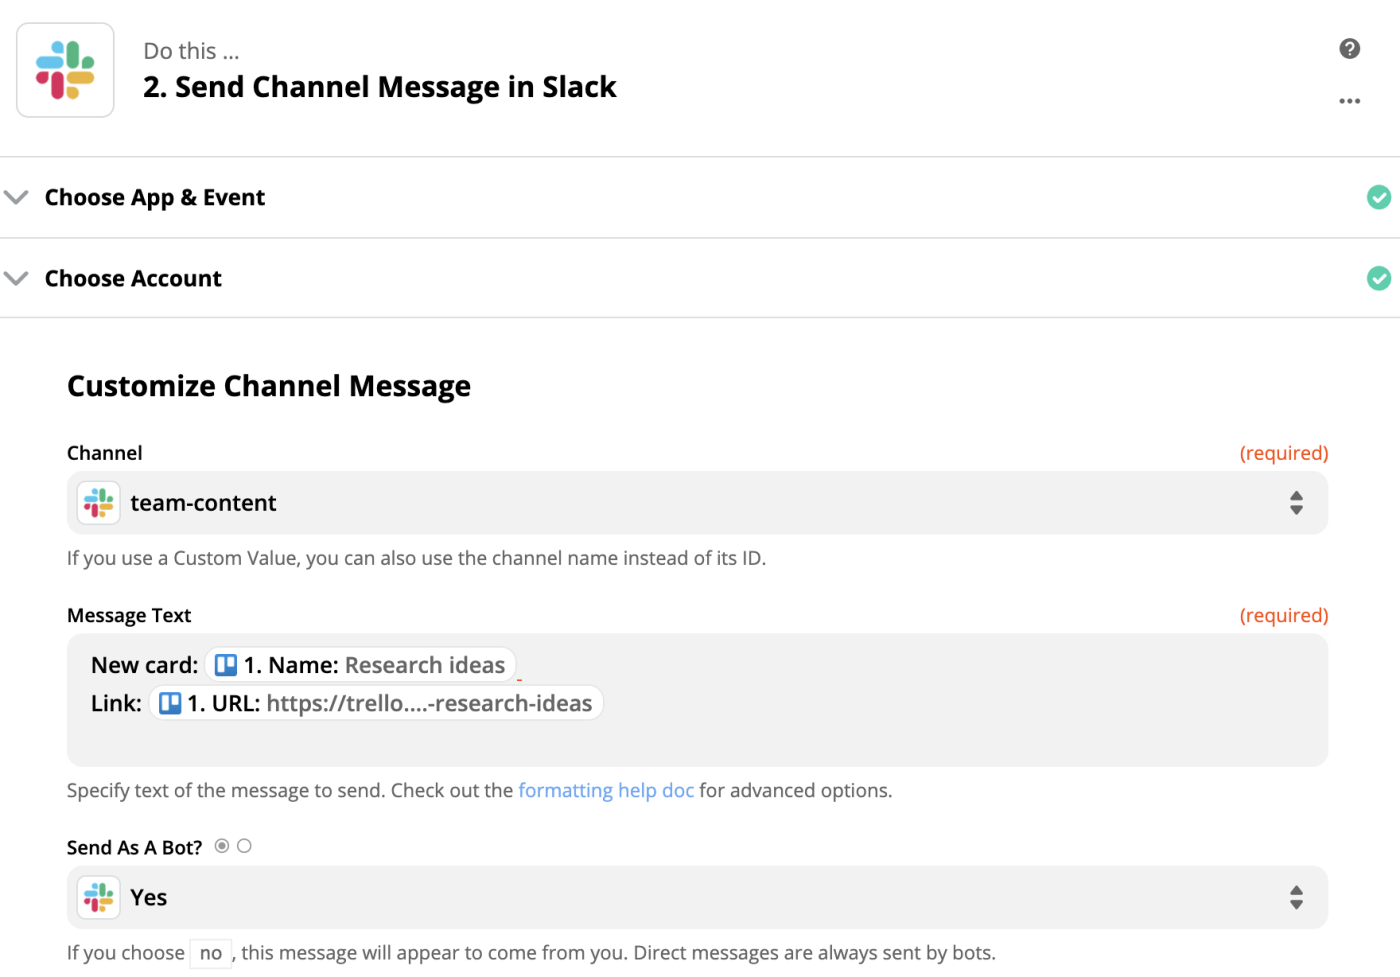 Trigger channel messages in Slack from any app through Zapier